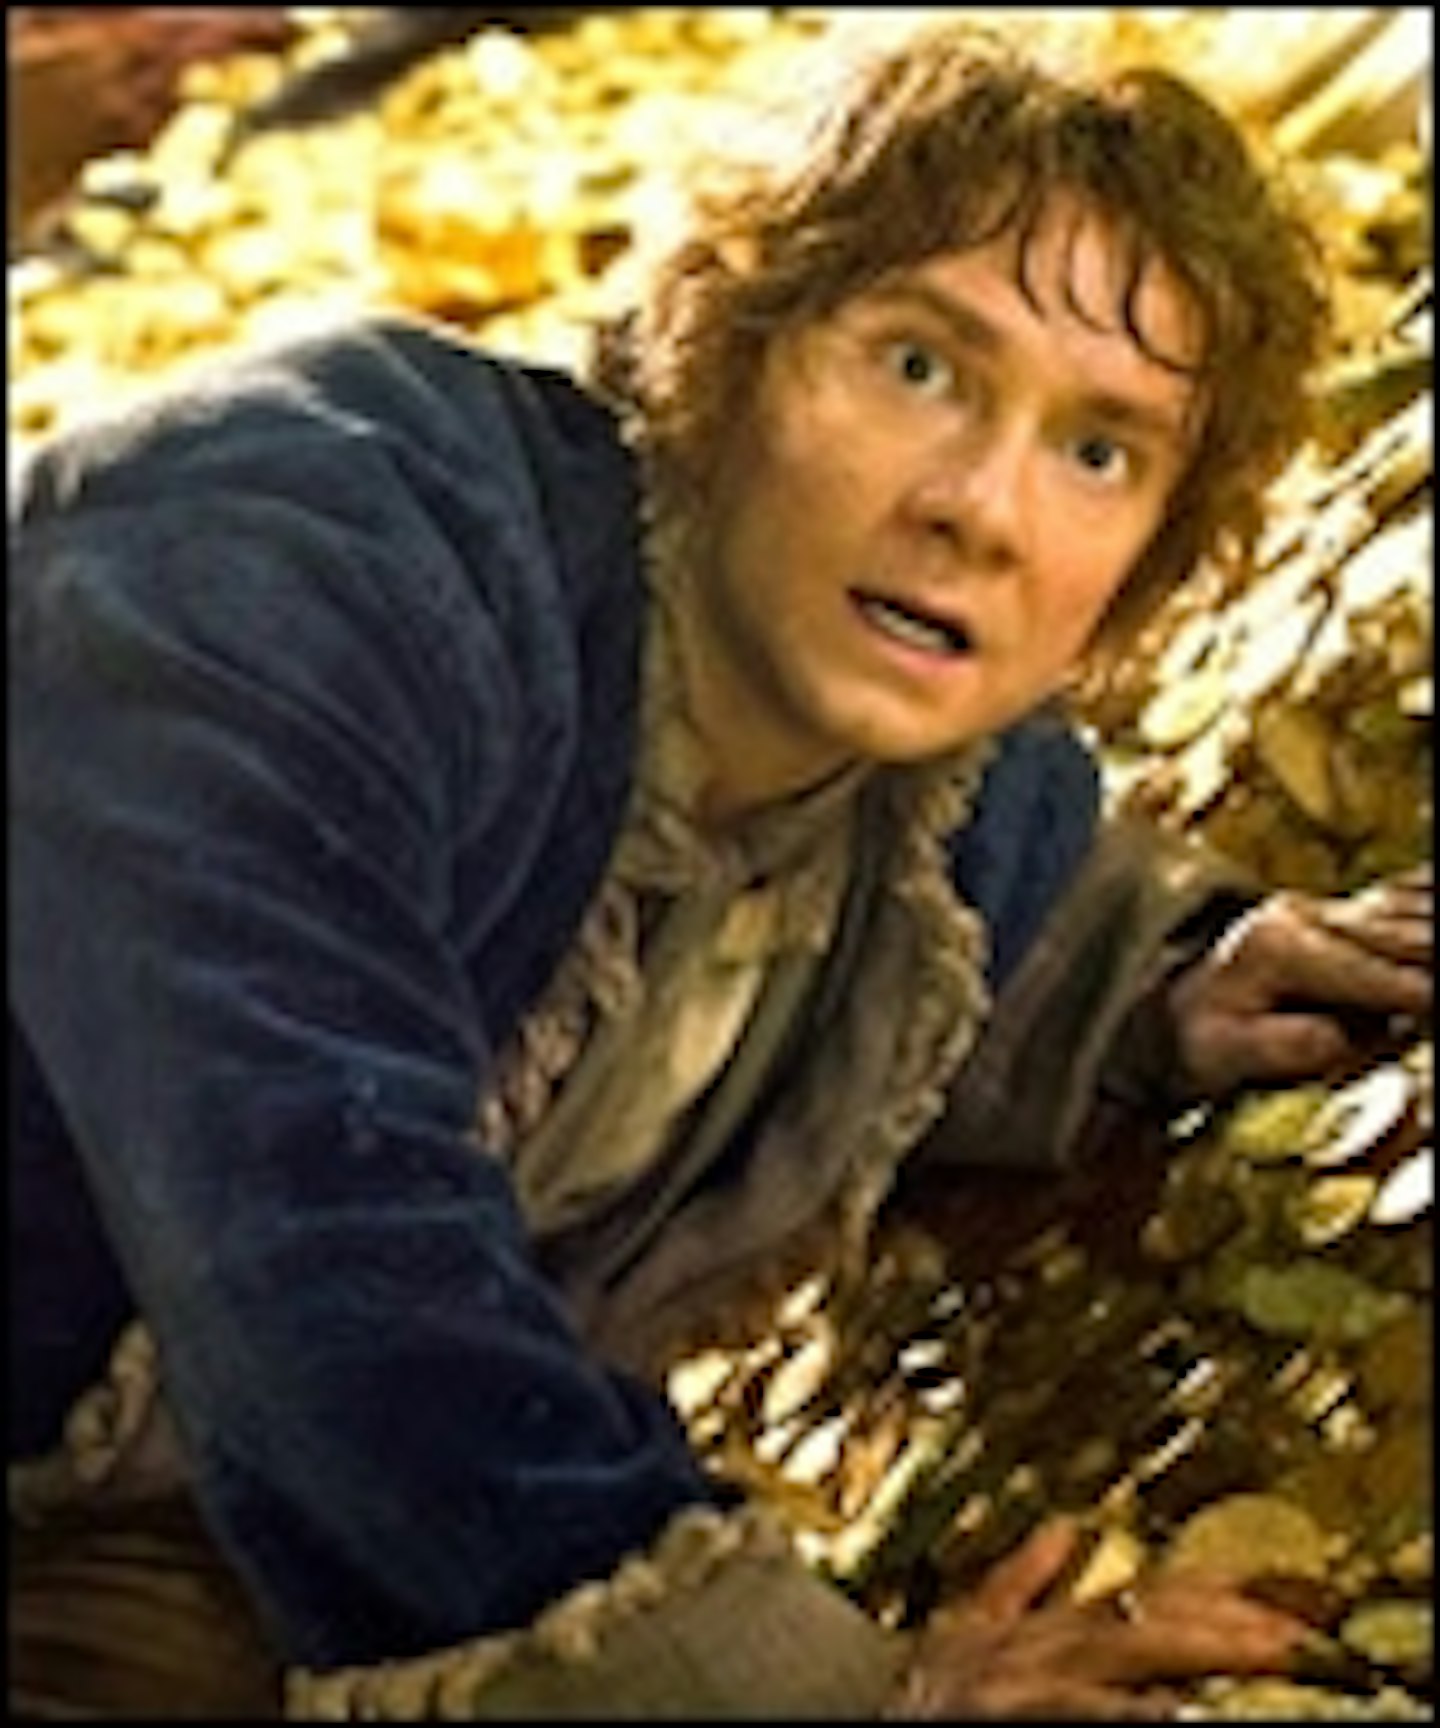 Latest TV Spot For The Desolation Of Smaug